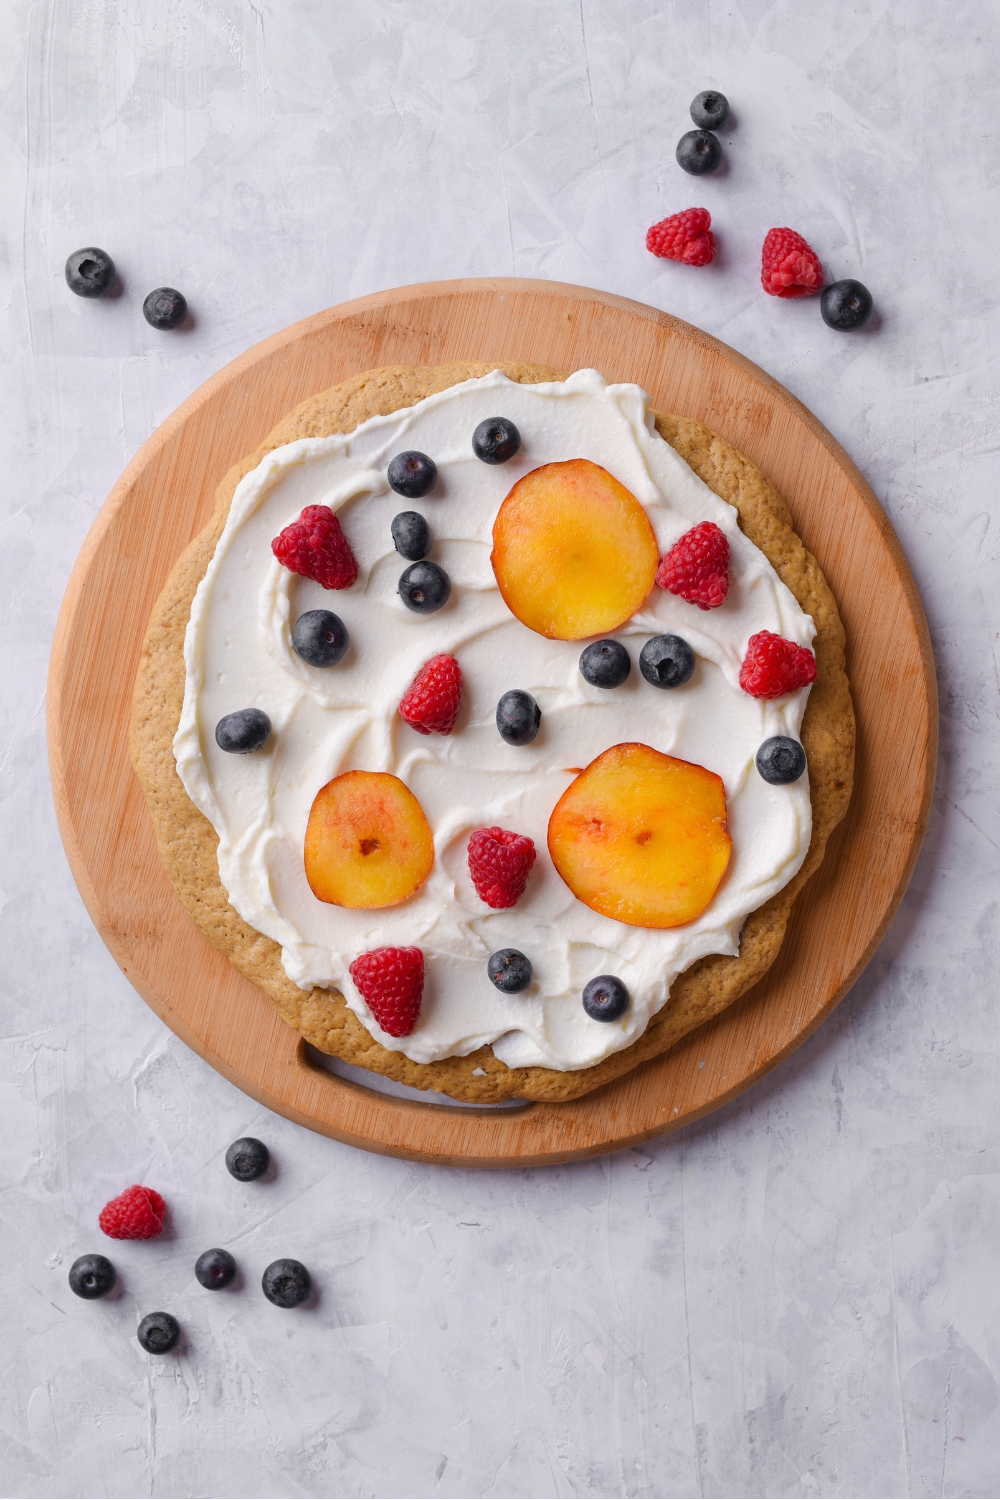 A wooden round board with an assembled fruit pizza.